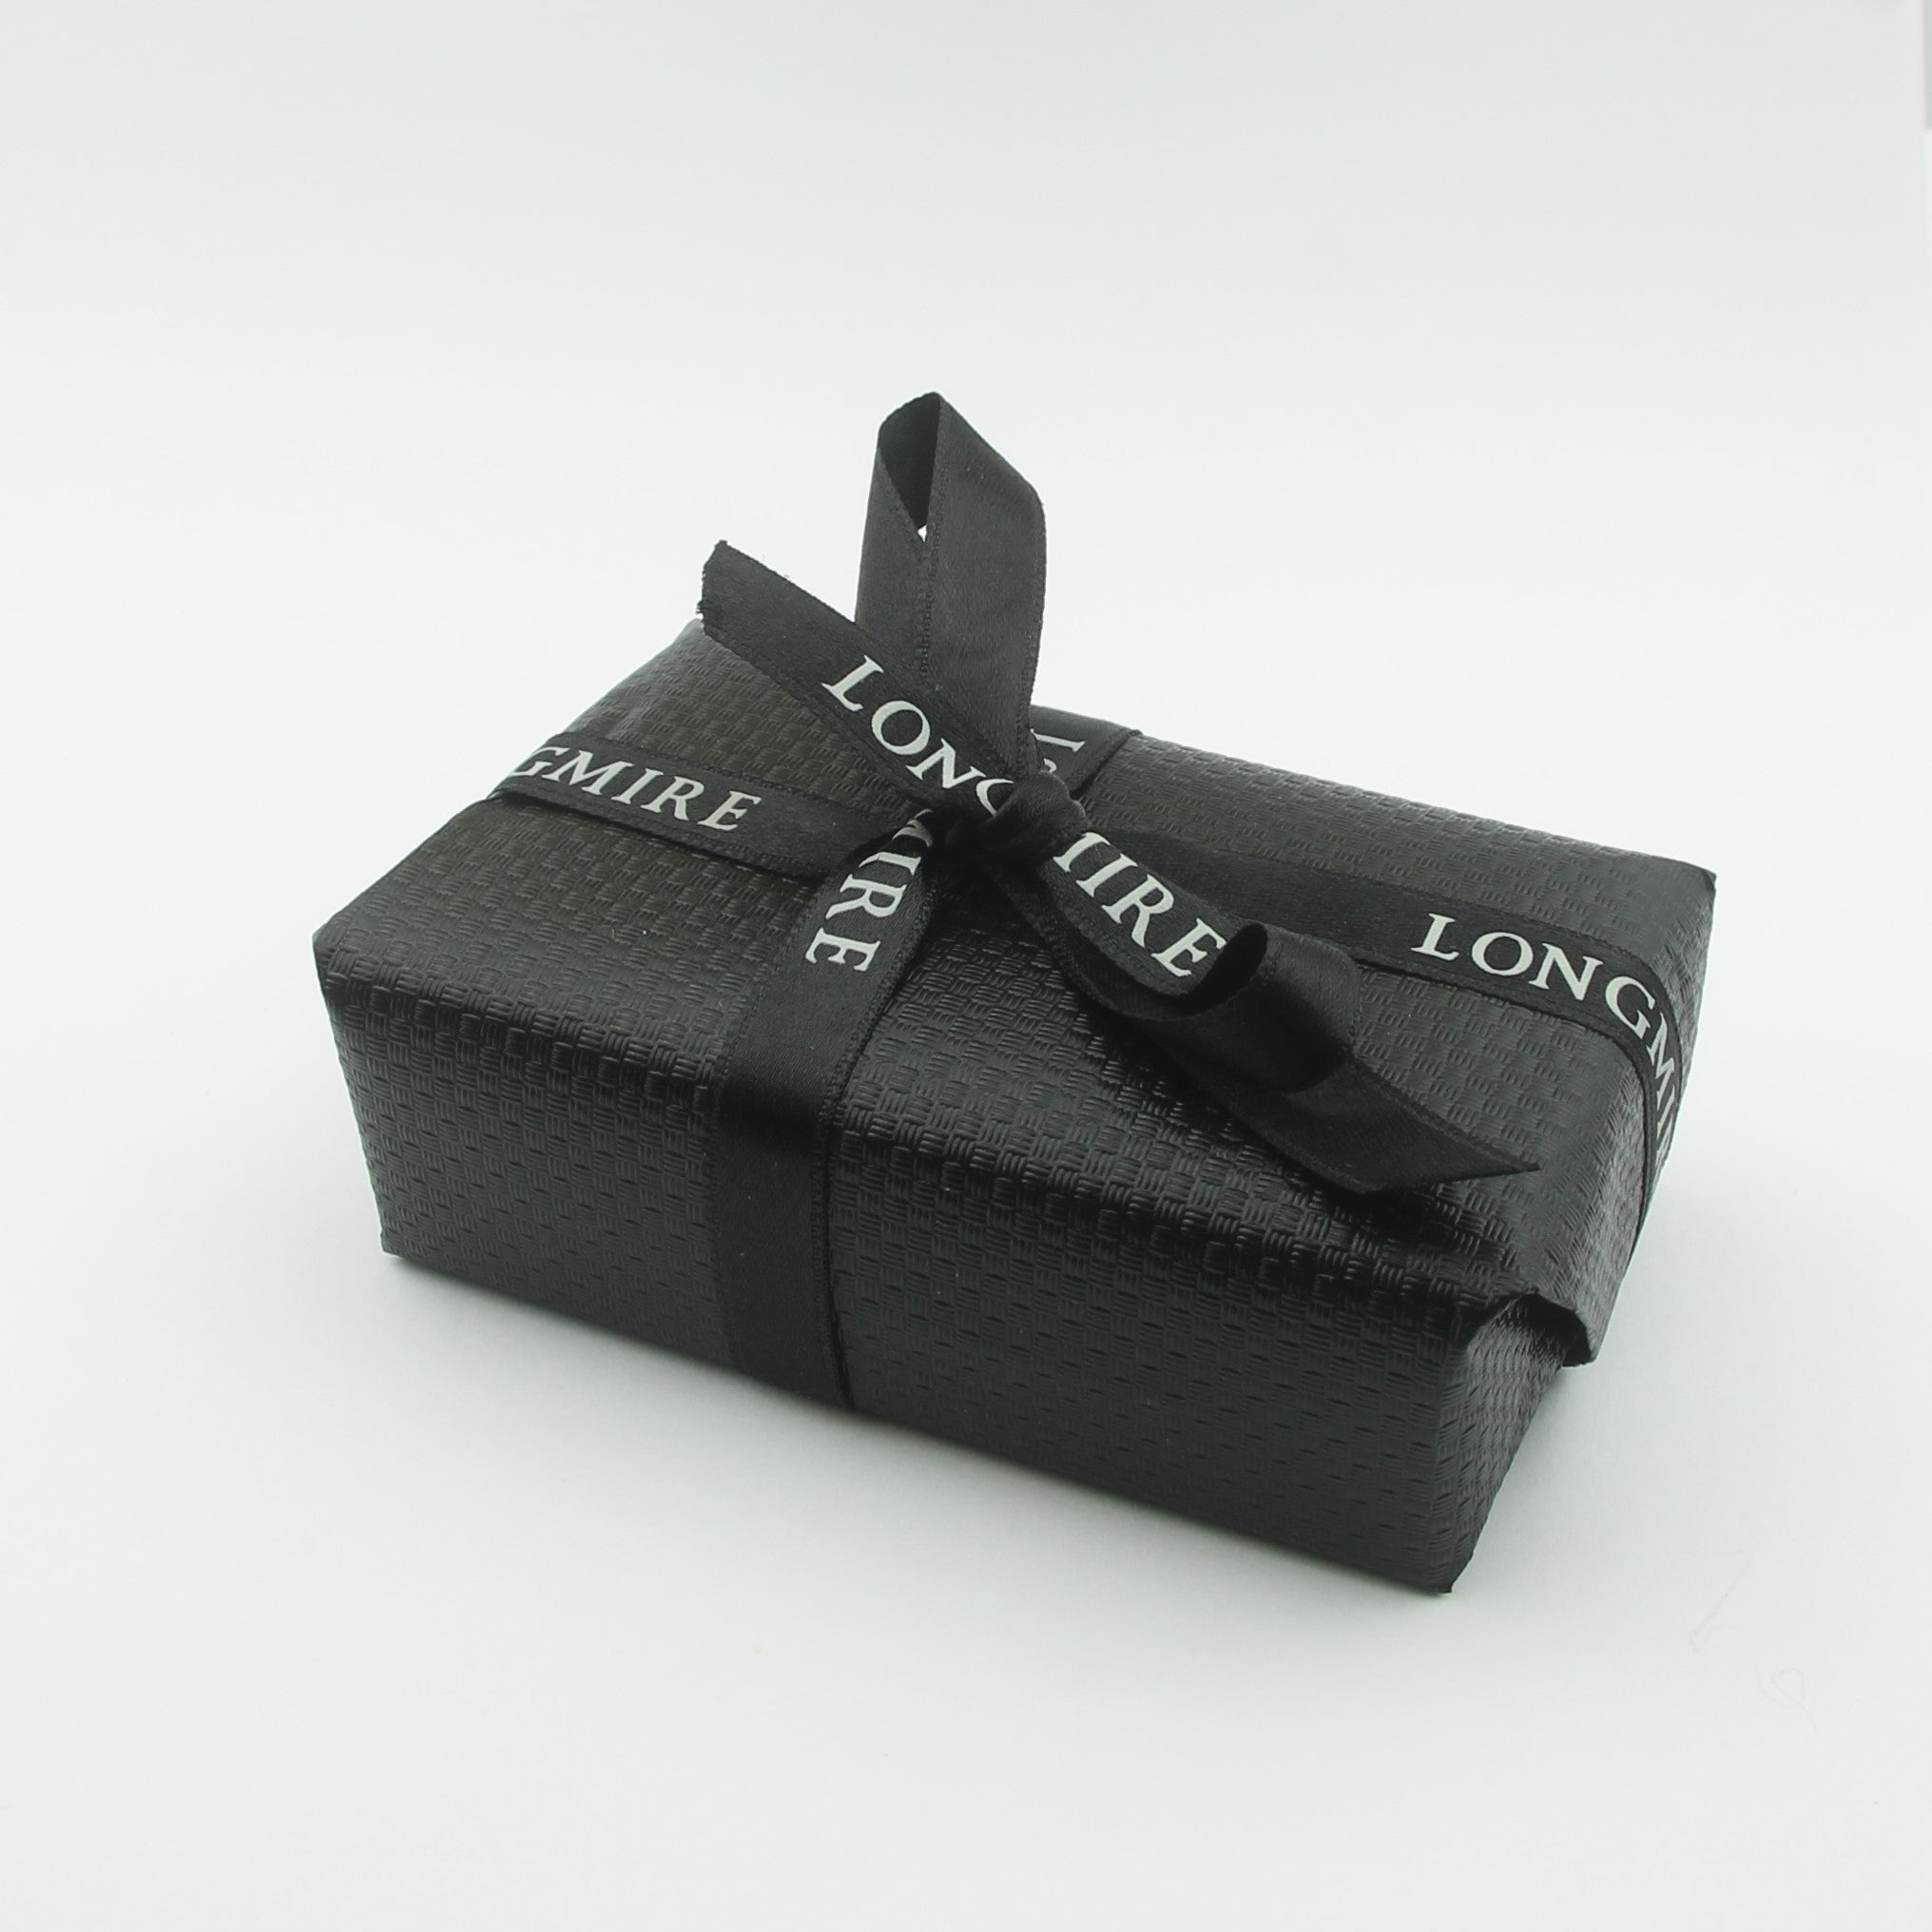 Longmire links gift wrapped